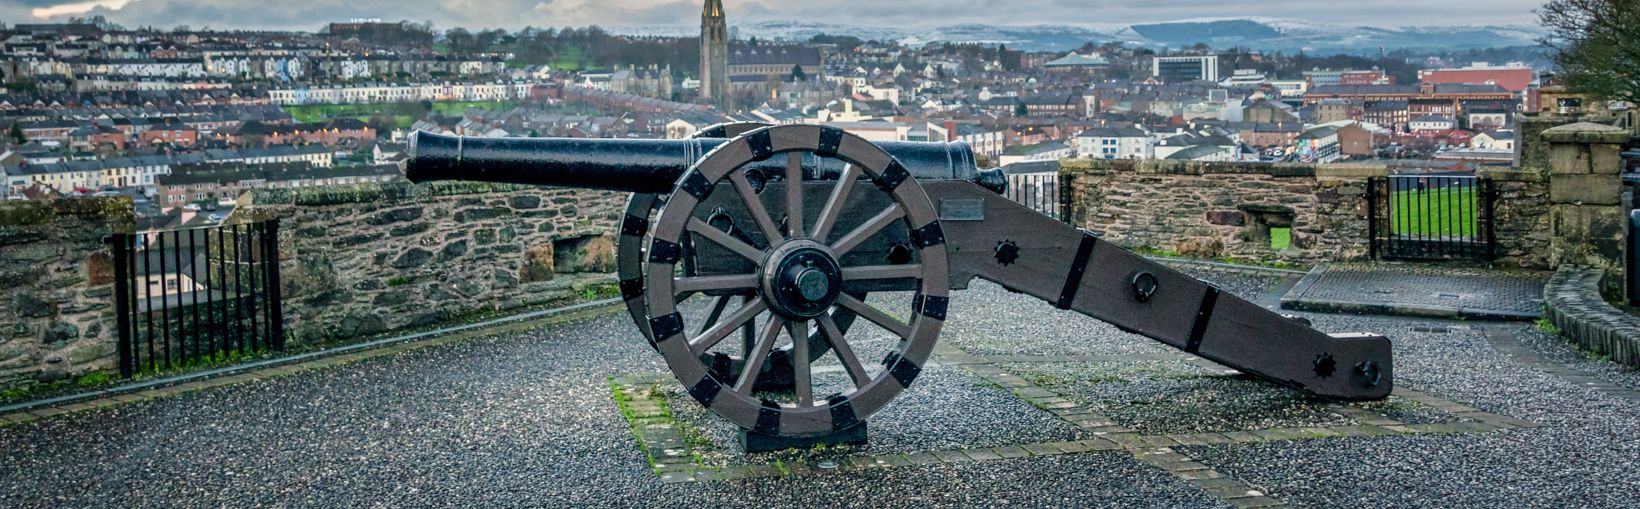 This is a picture of the old siege cannon on historic Derry Walls in Northern Ireland